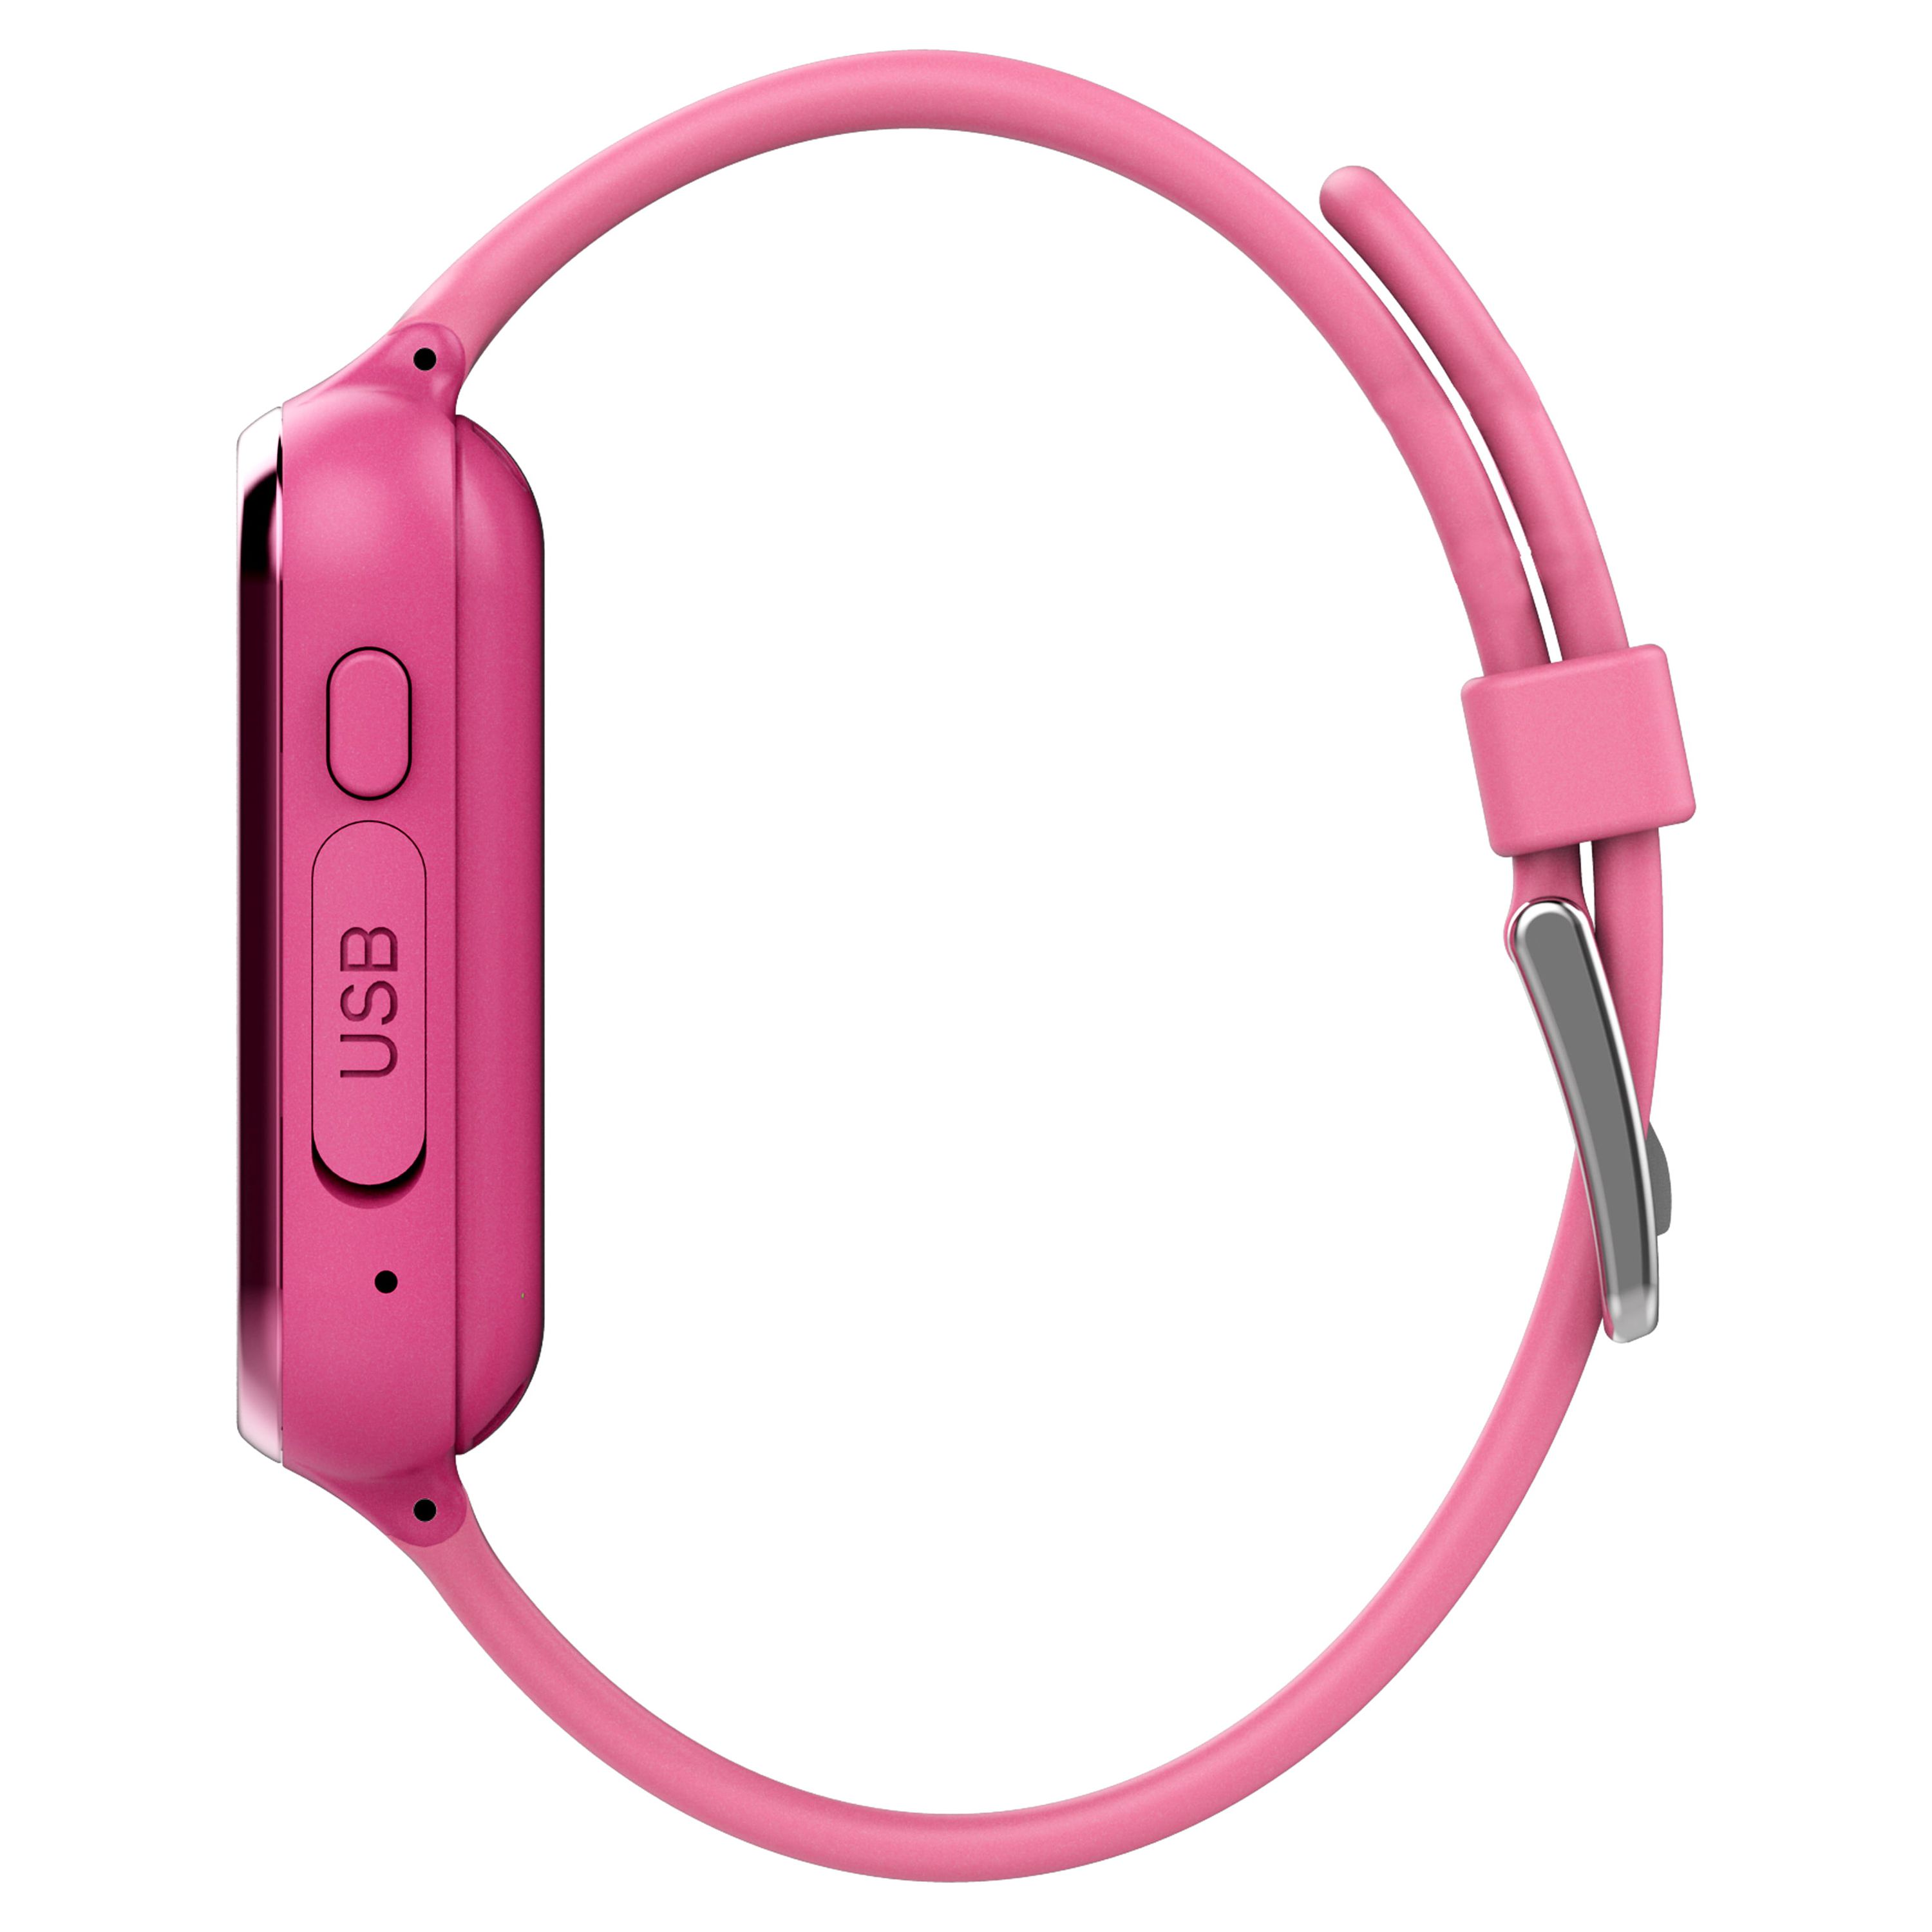 Jojo Siwa iTime Unisex Child Interactive Smart Watch 40mm in Pink with Silicone Strap (JOJ4128) - image 3 of 5